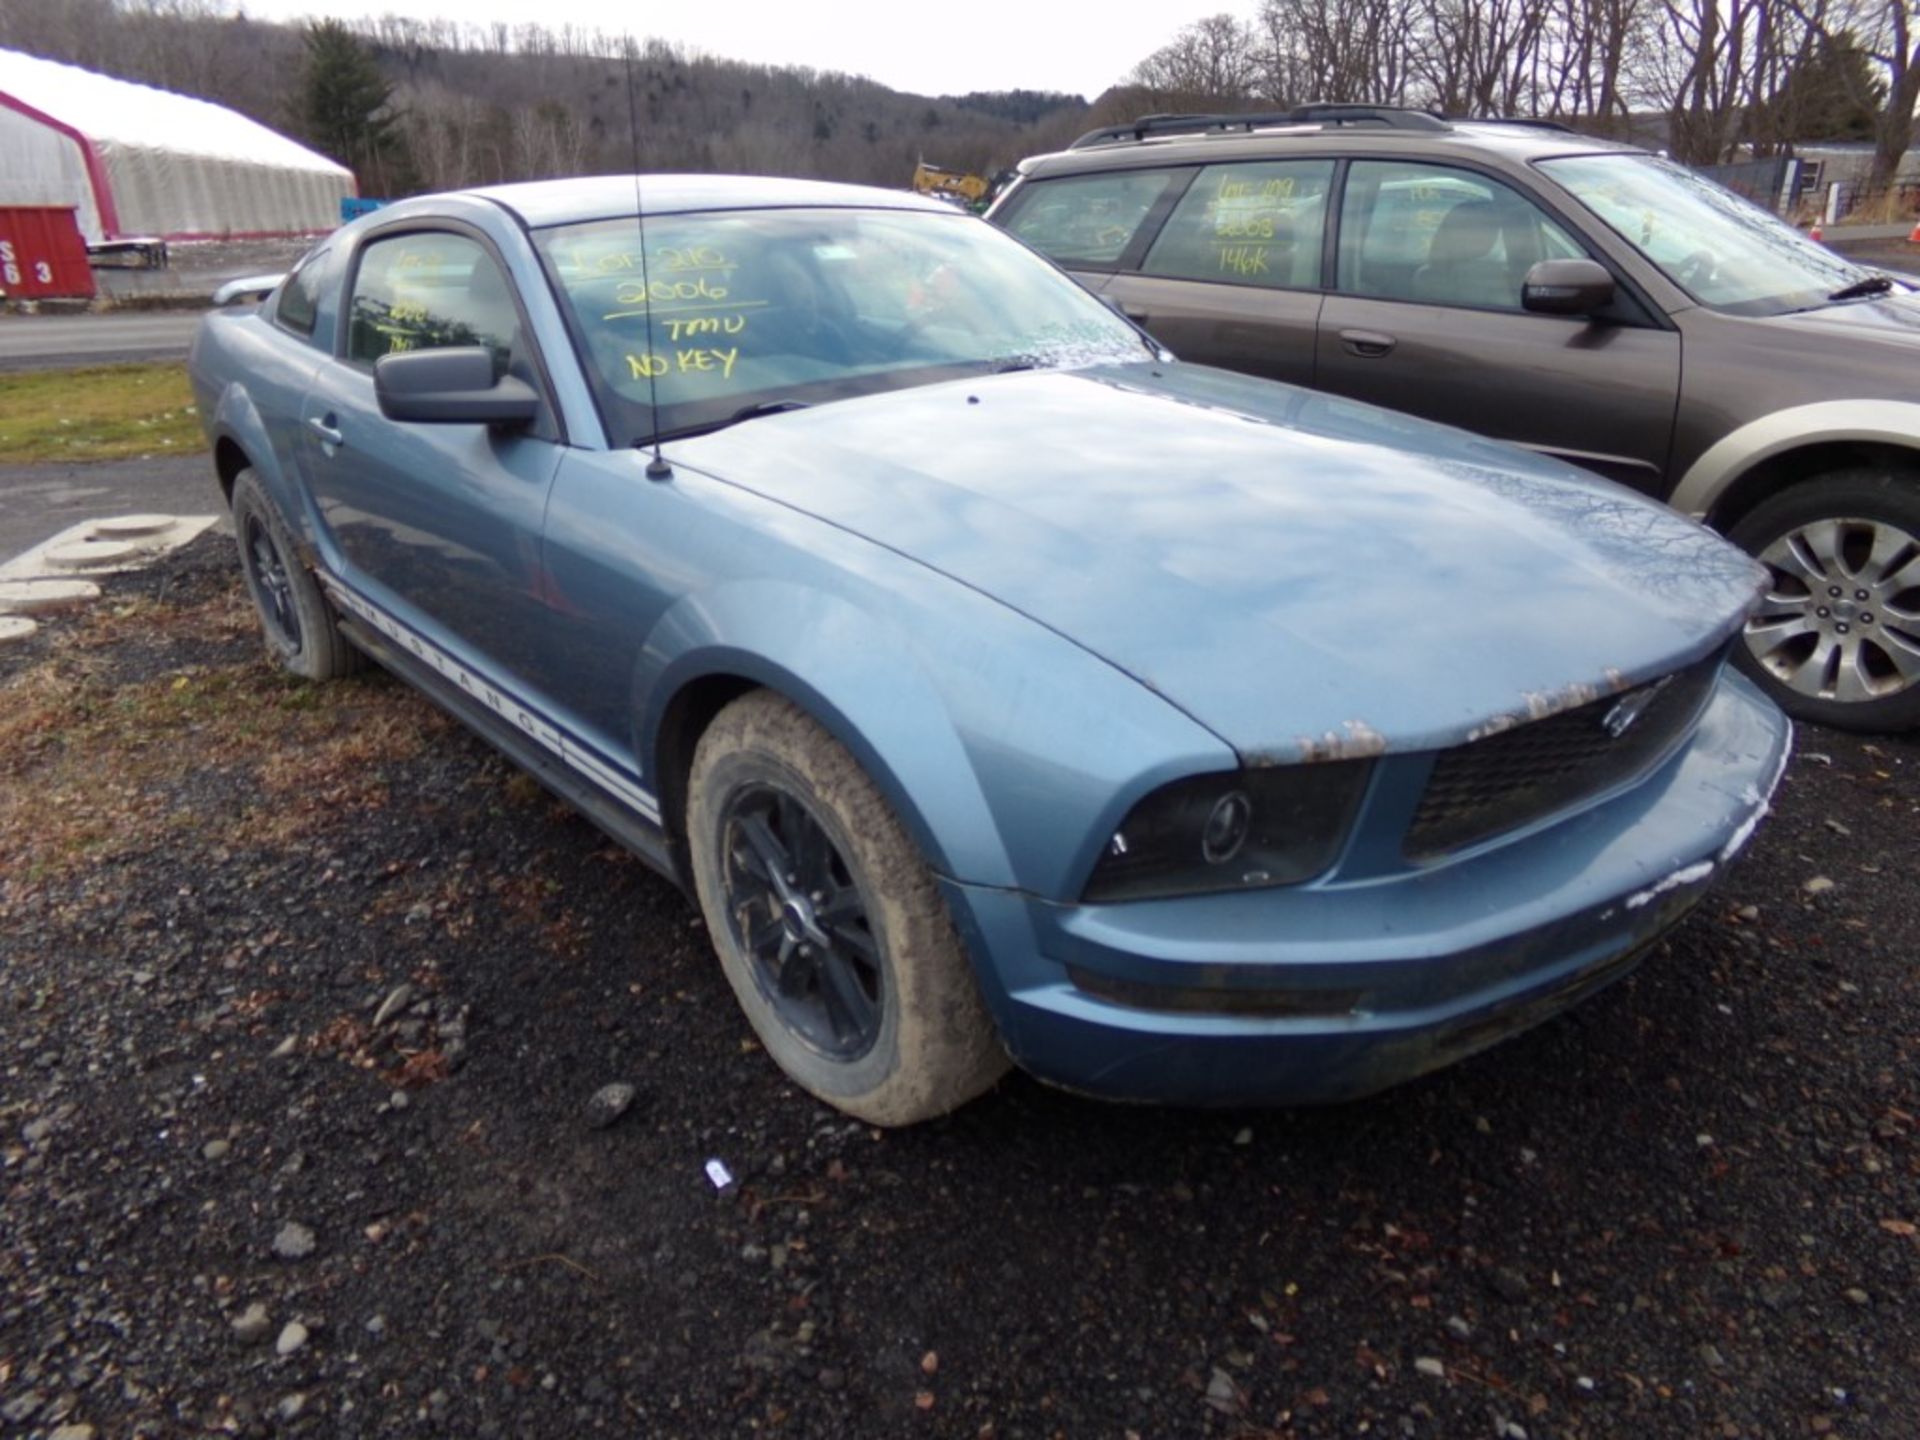 2006 Ford Mustang V6, Blue, 159,627 Mi., VIN#:1ZVFT80N965225795 - OPEN TO ALL BUYERS, RUNS & - Image 4 of 9